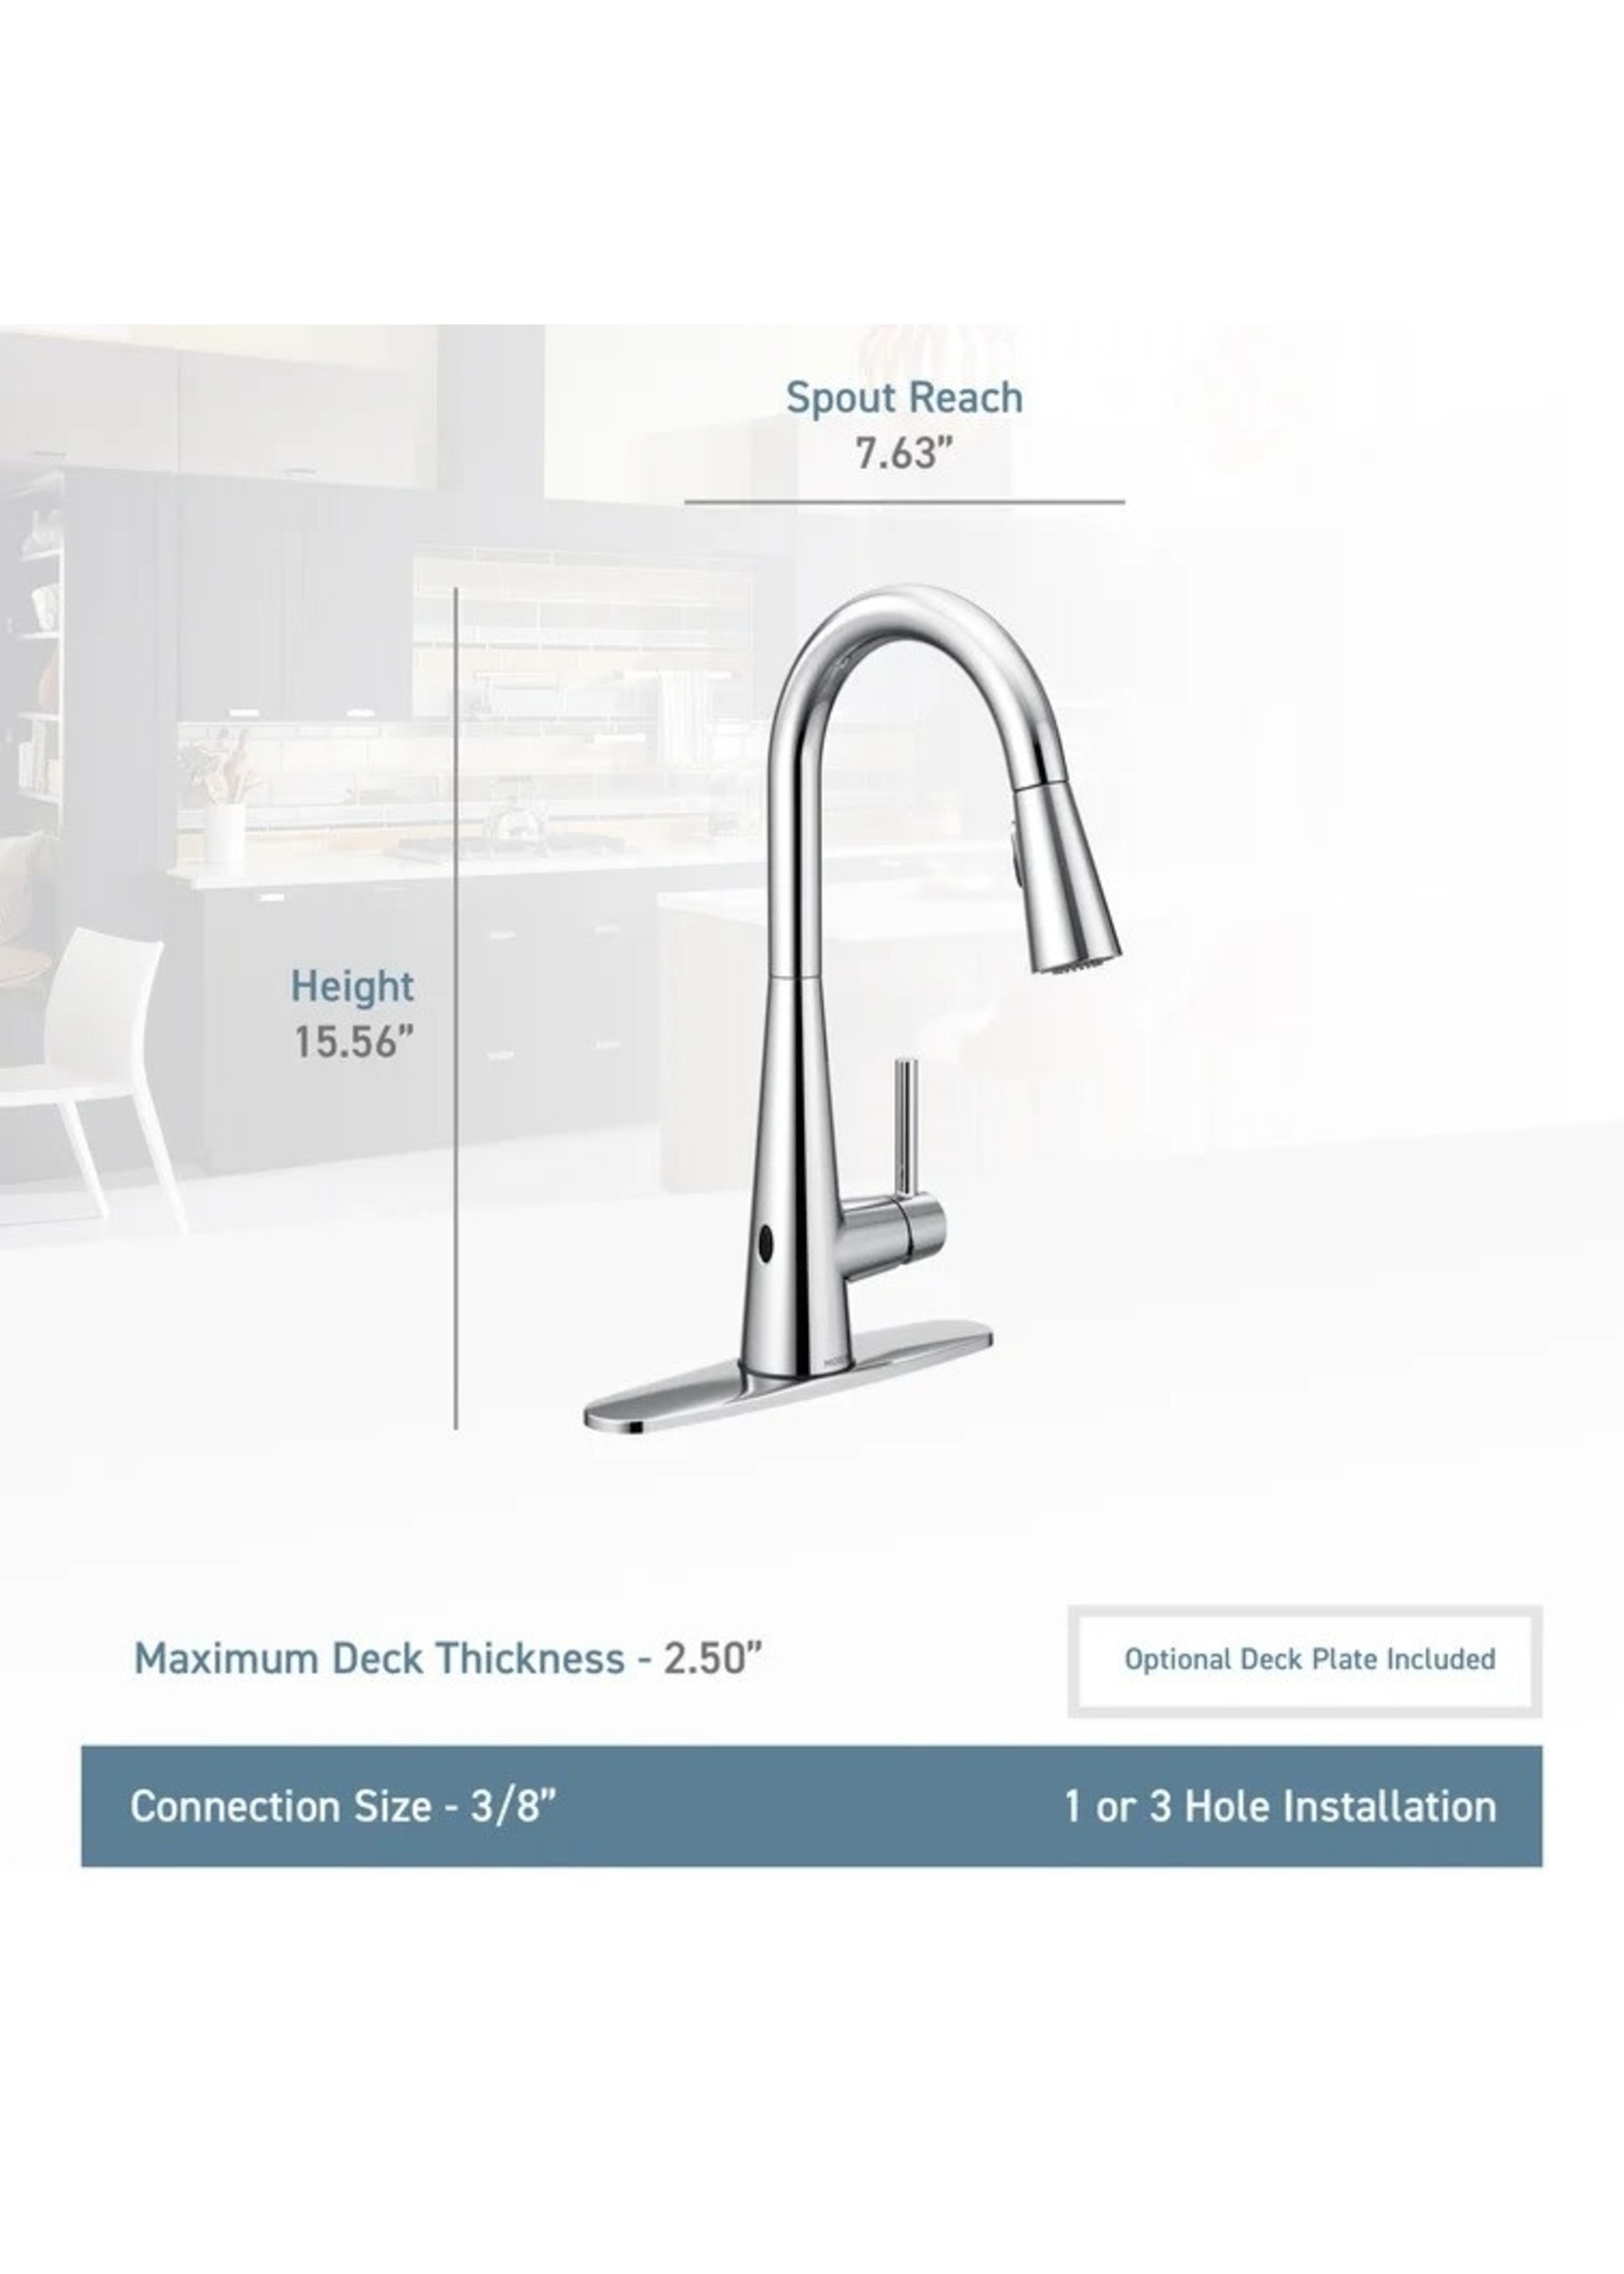 *Moen Sleek Pull Down Touchless Single Handle Kitchen Faucet with Power Clean & Reflex